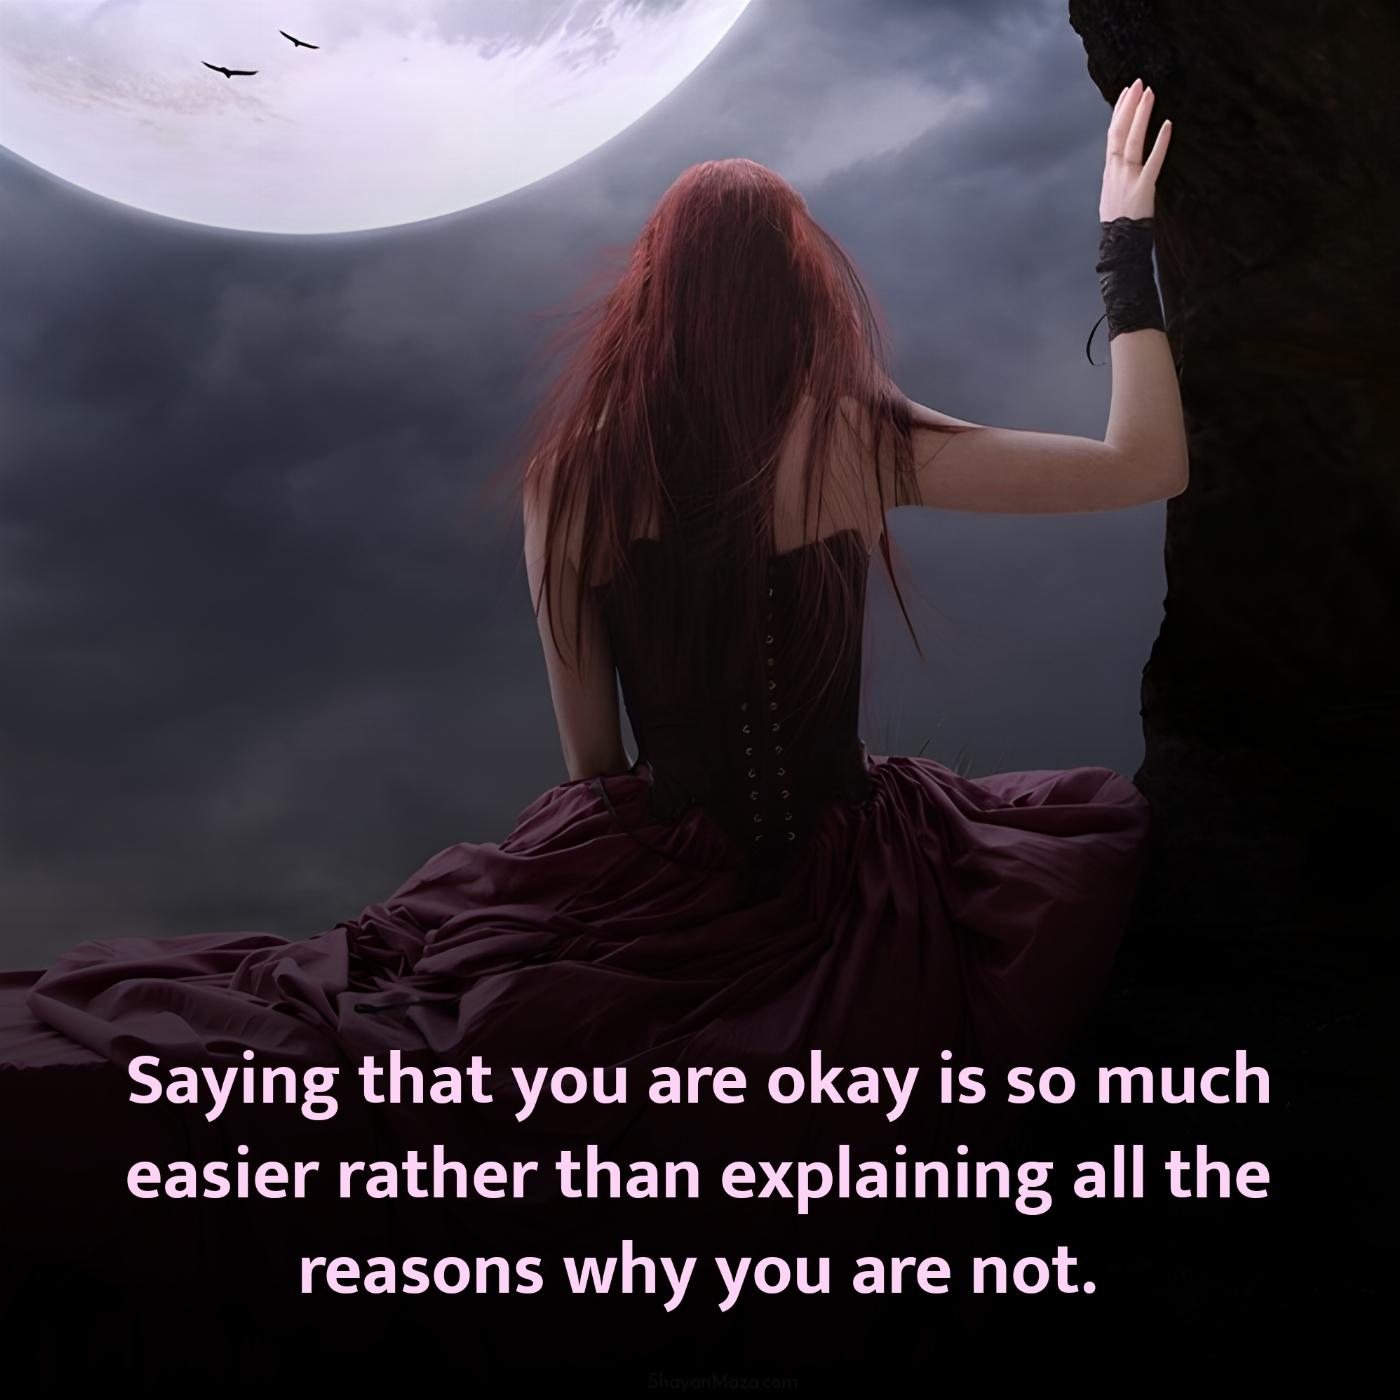 Saying that you are okay is so much easier rather than explaining